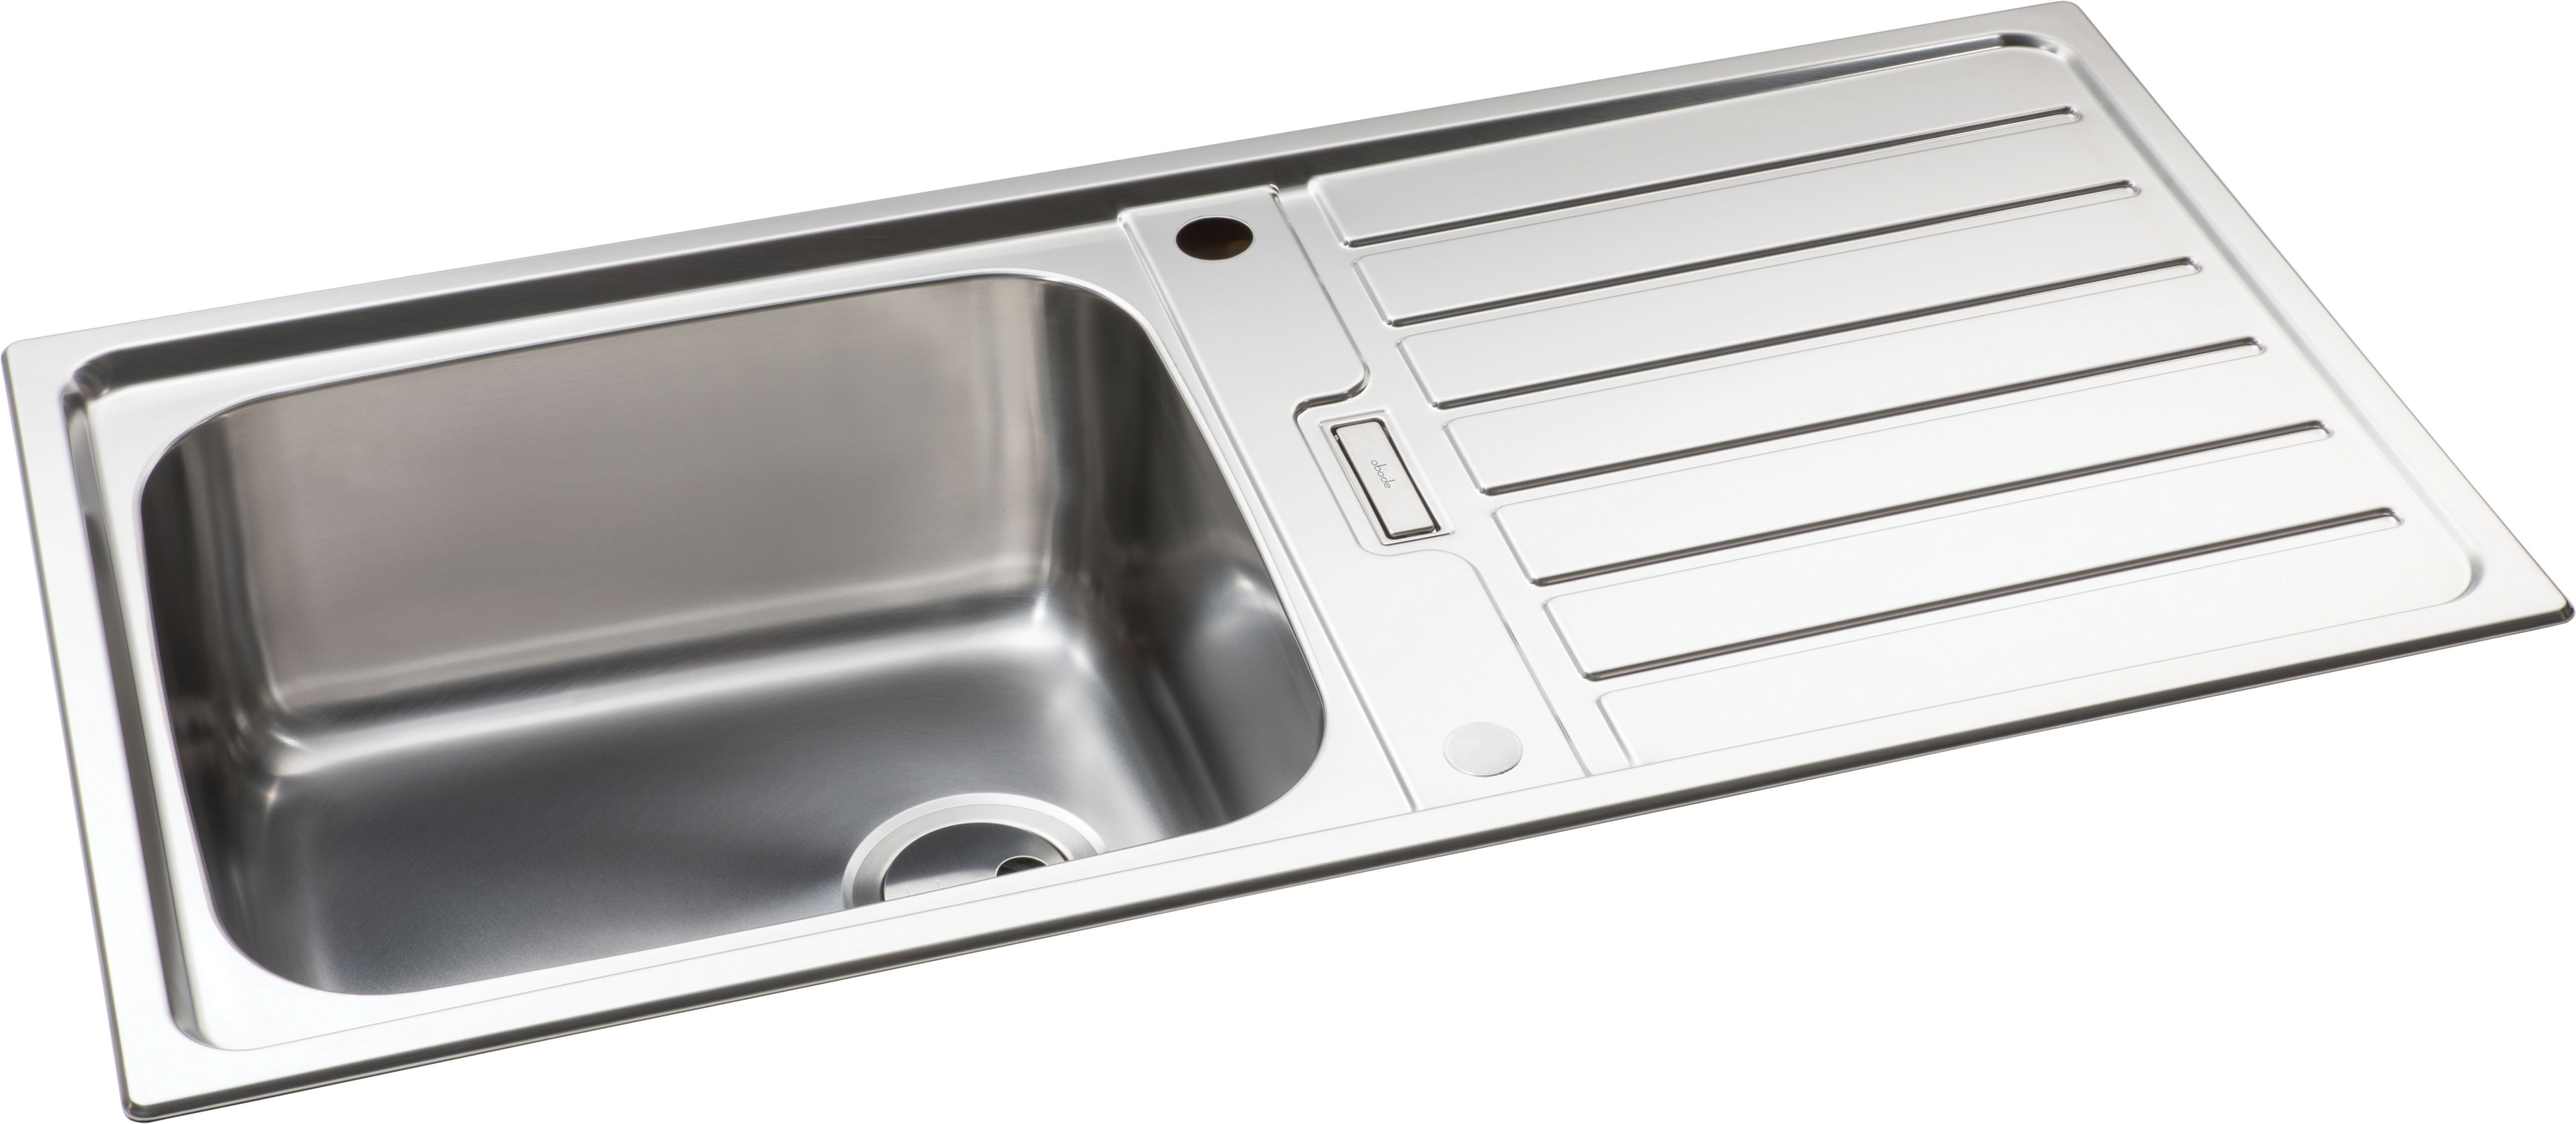 Image of Neron 1 Bowl Stainless Steel Kitchen Sink